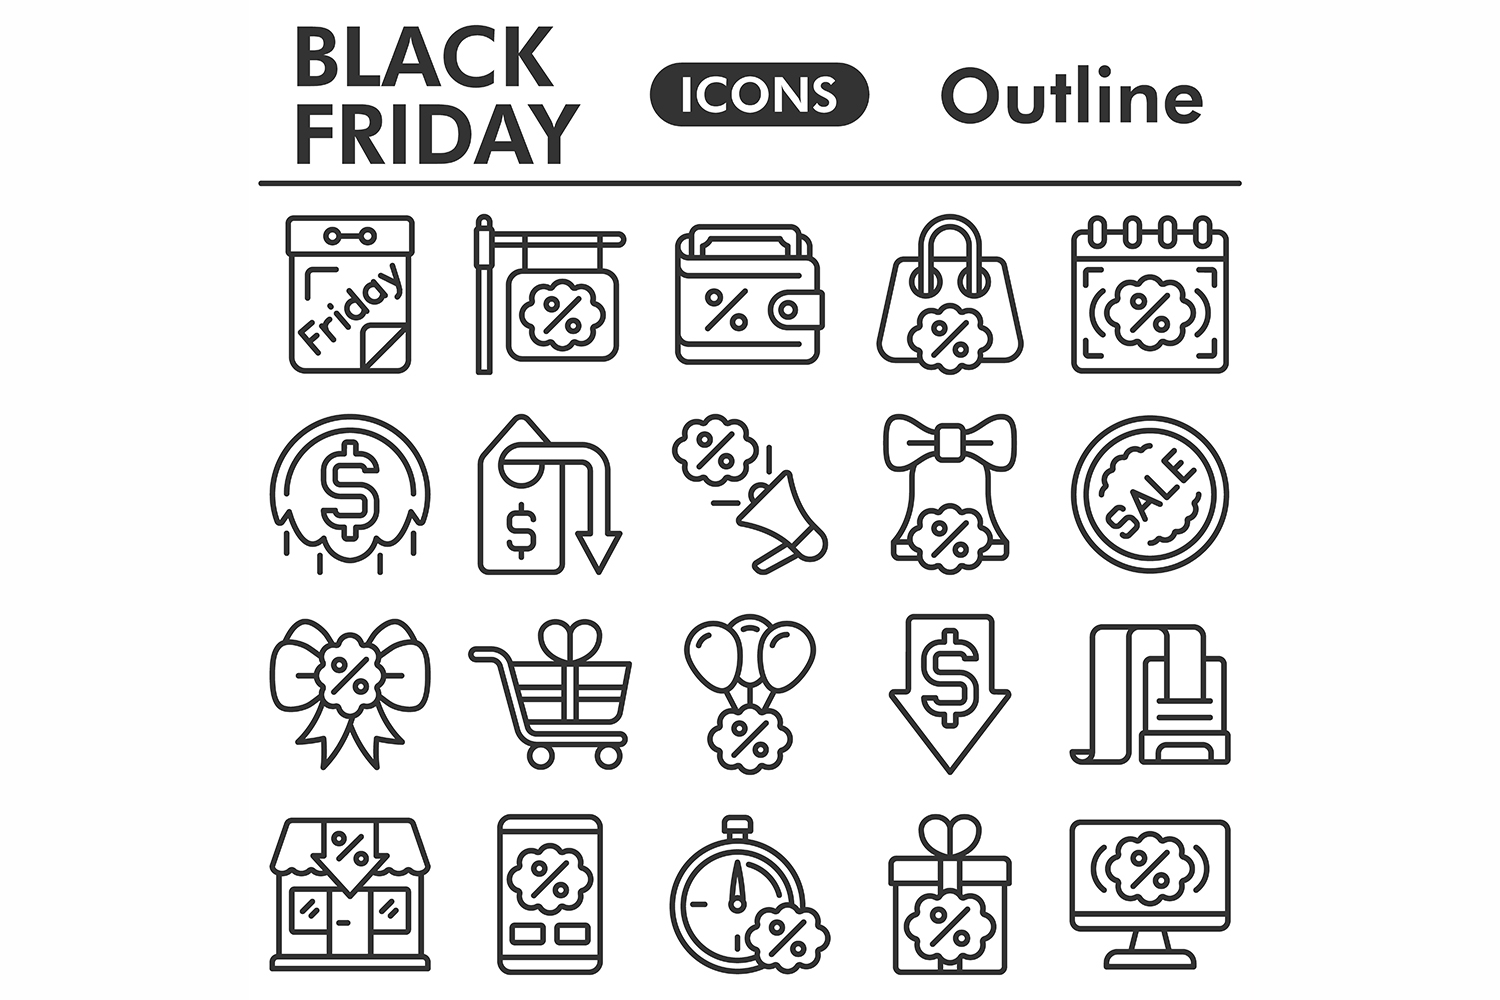 Black friday icons set, outline style pinterest preview image.